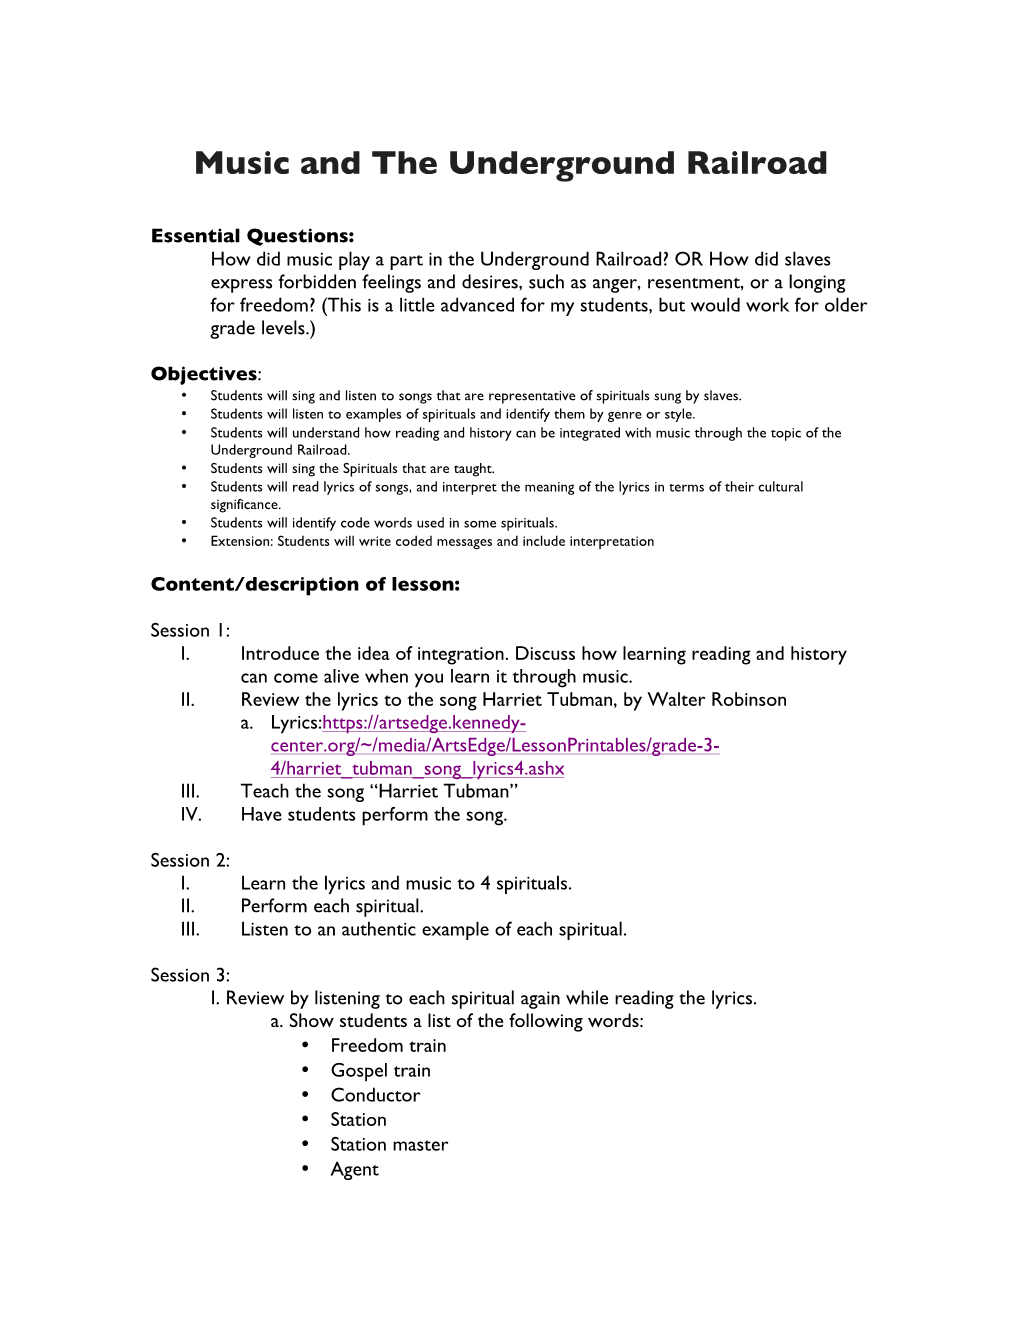 Music and the Underground Railroad